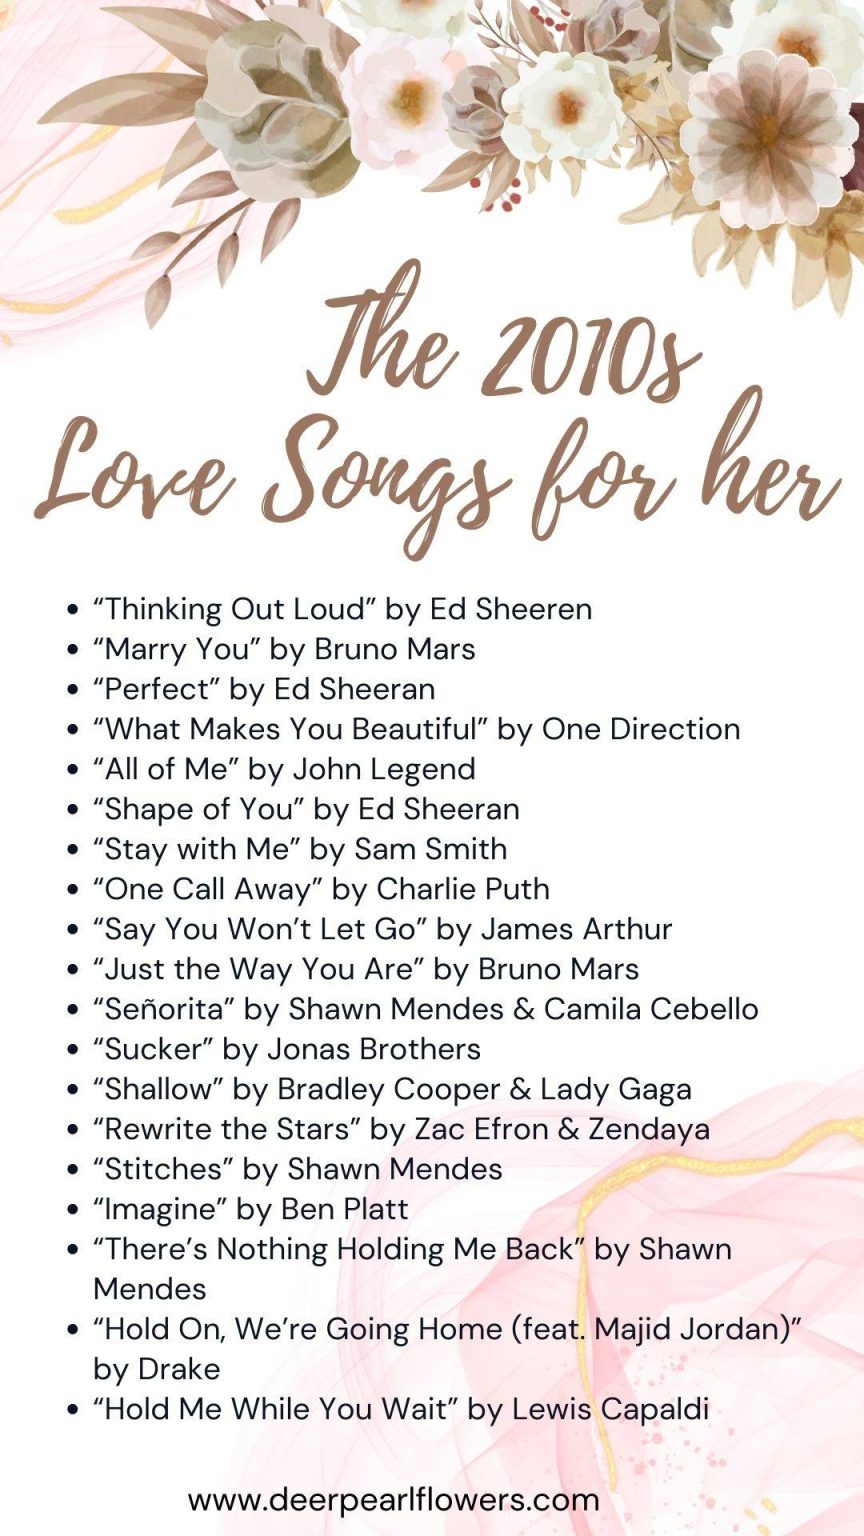 2010s Love Songs For Her 864x1536 